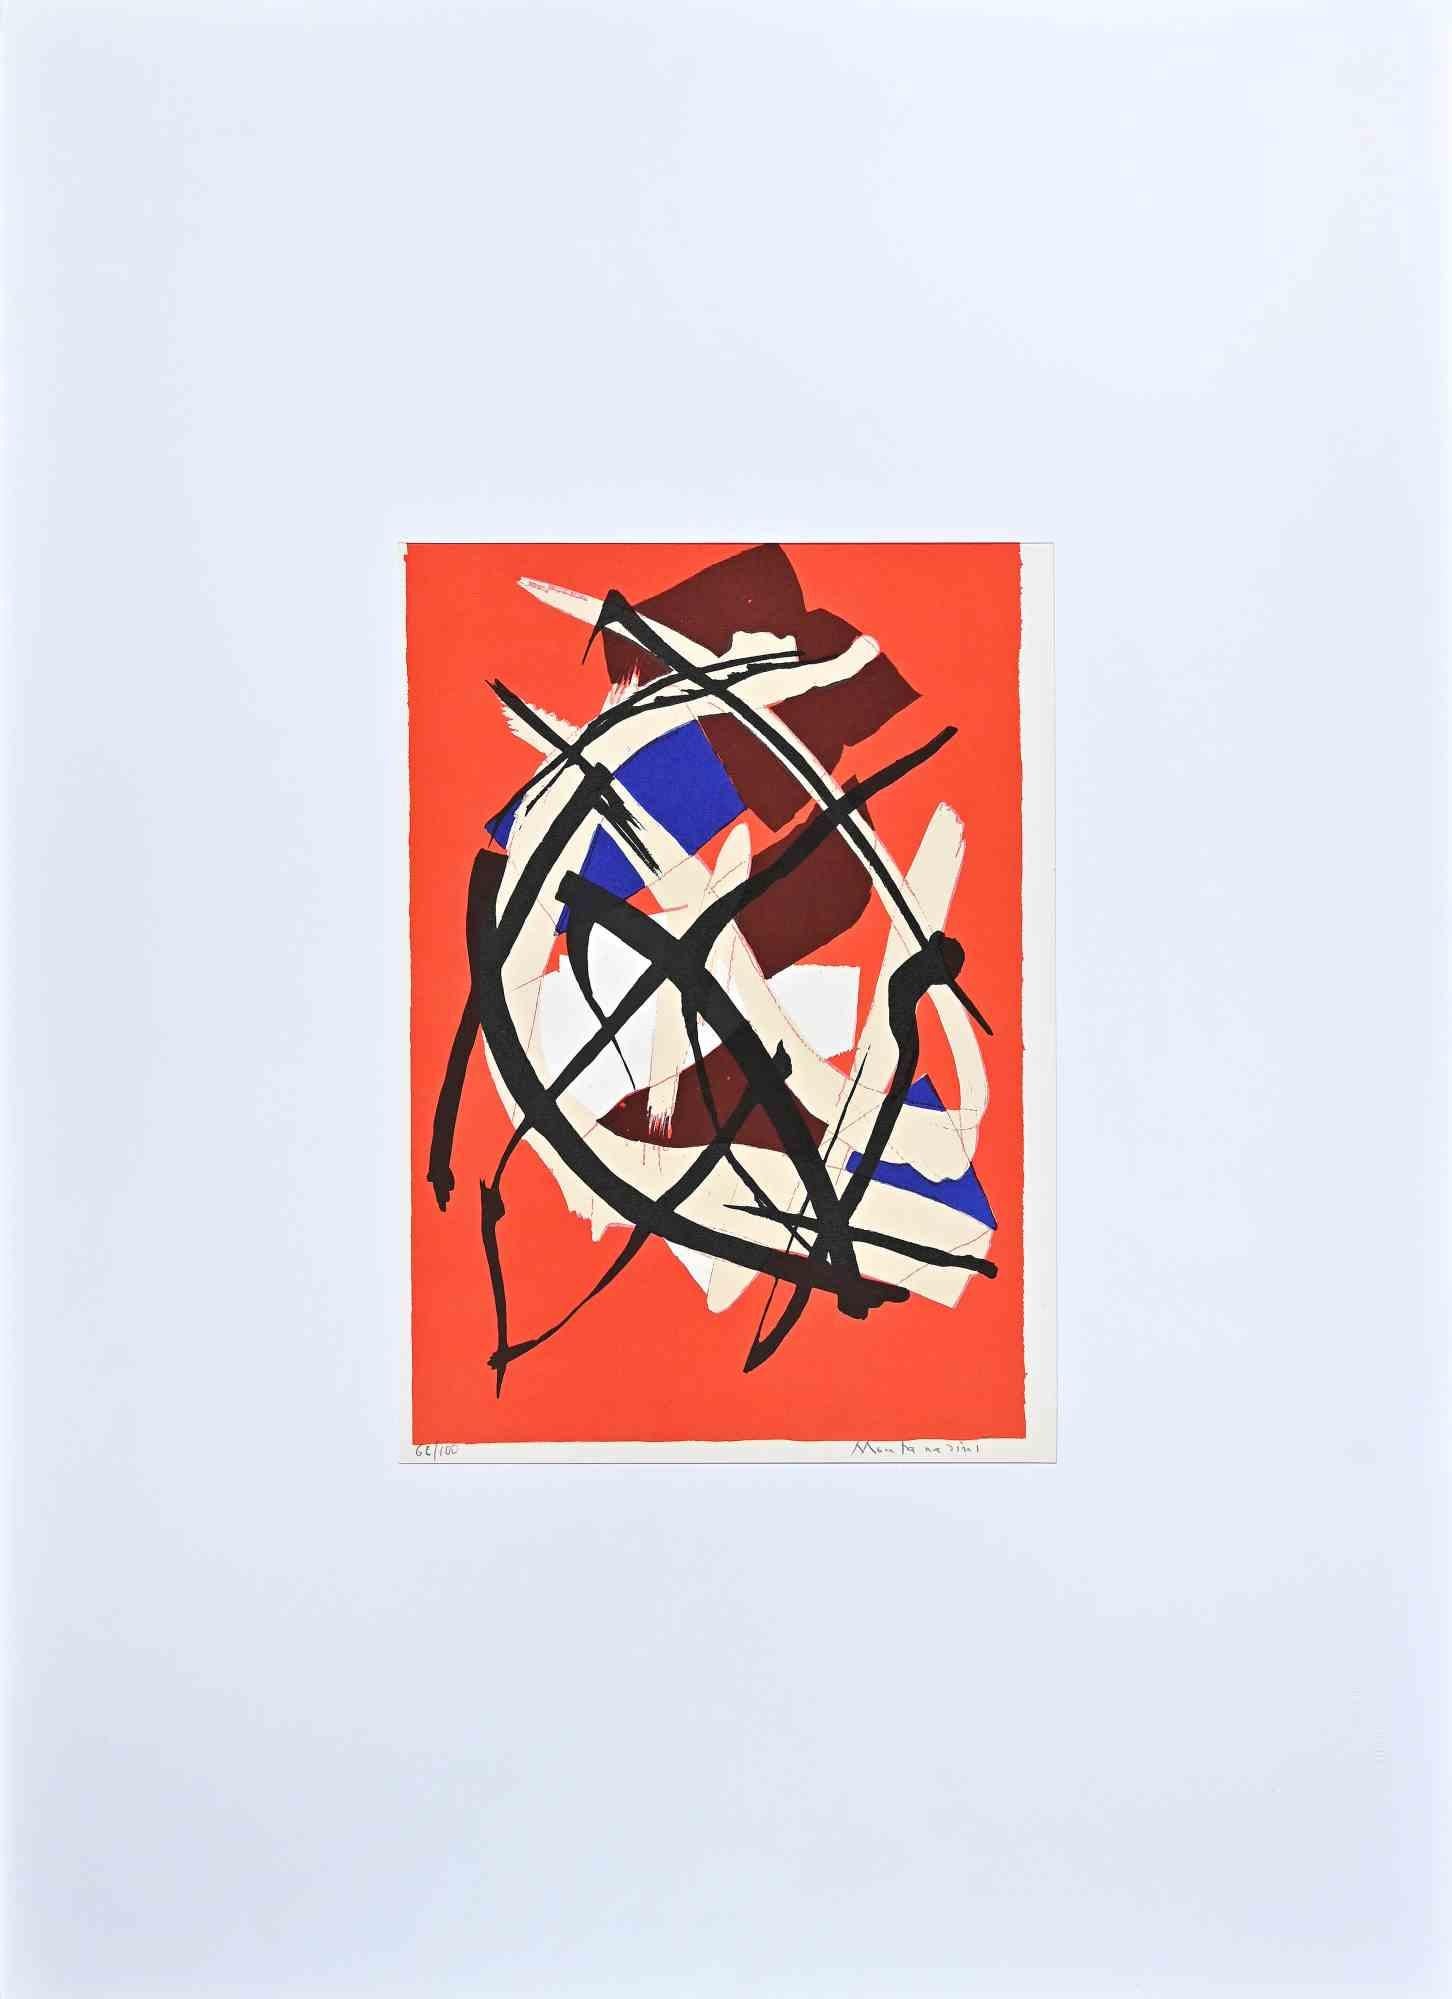 Abstract Composition is an Original Lithograph realized by Luigi Montanarini in 1973.

Limited edition of 100 copies, editor "La Nuova Foglio SPA".

Very good condition on a white cardboard passpartout (70x50 cm).

Hand-signed and numbered by the